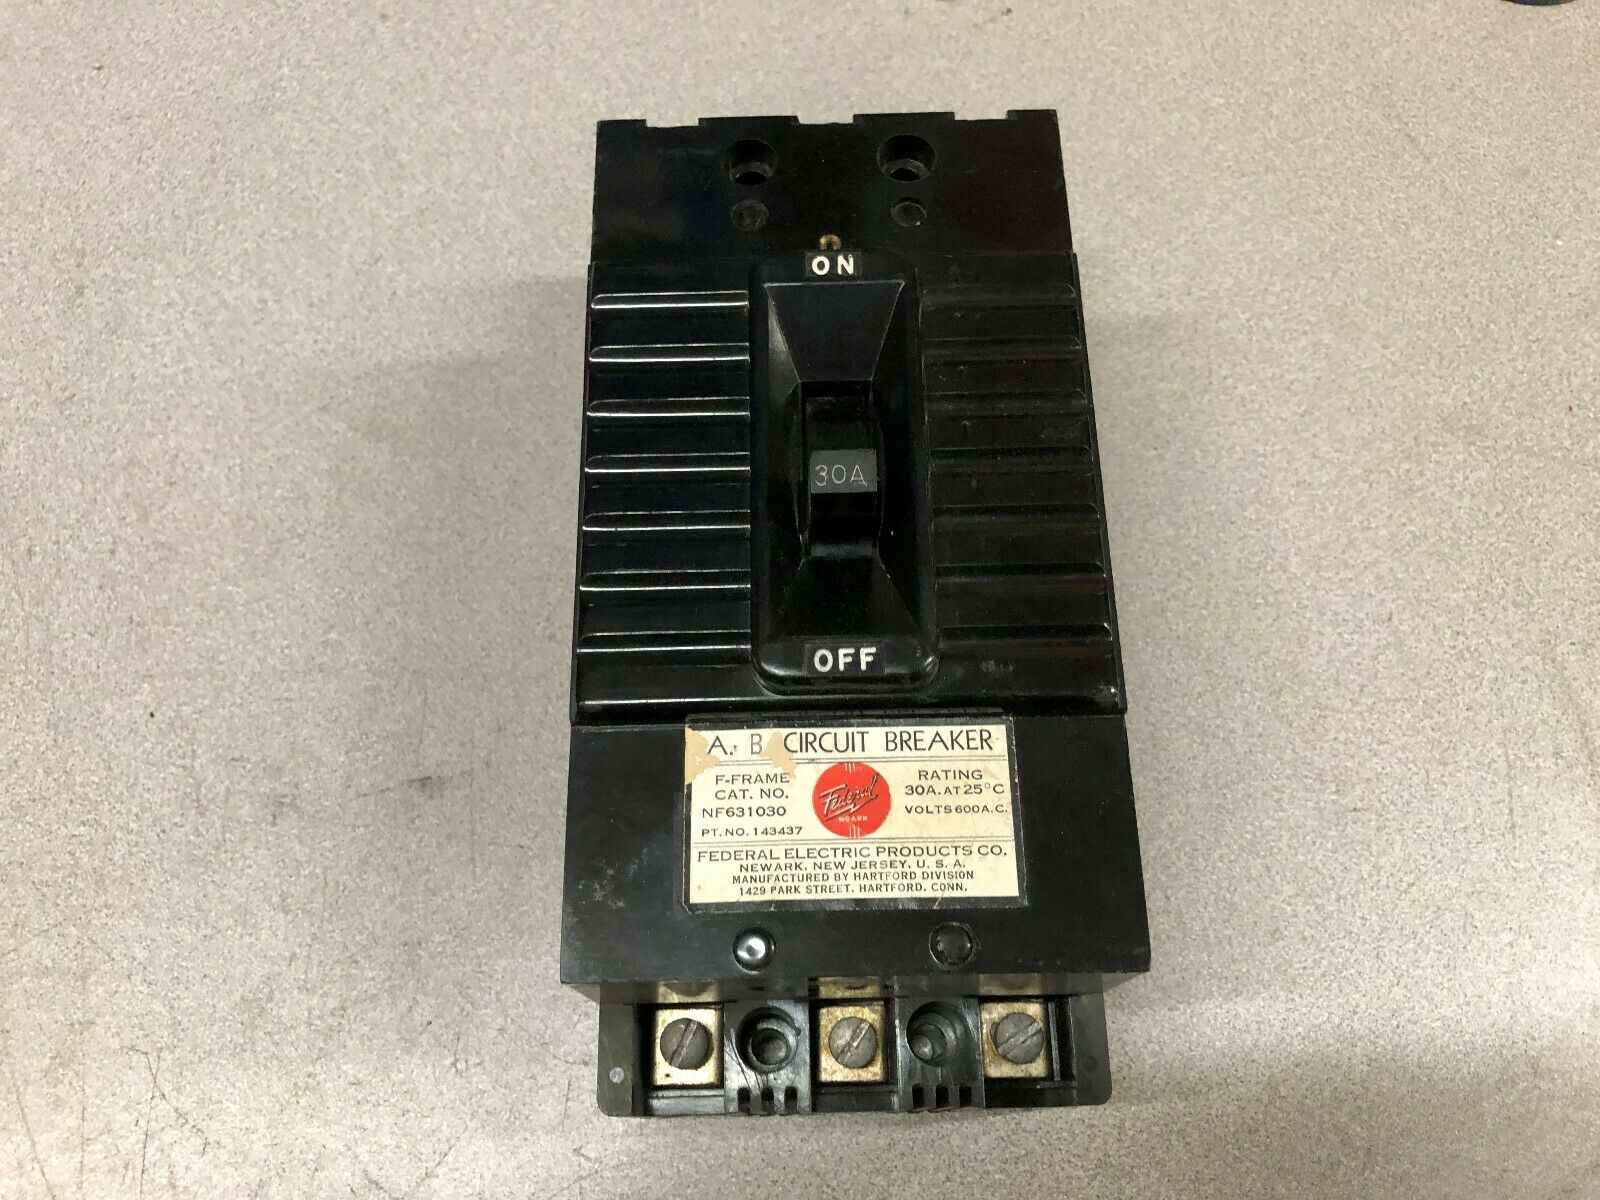 USED FEDERAL ELECTRIC PRODUCTS 30 AMP 600 VAC F-FRAME 3 POLE CIRCUIT BREAKER NF6